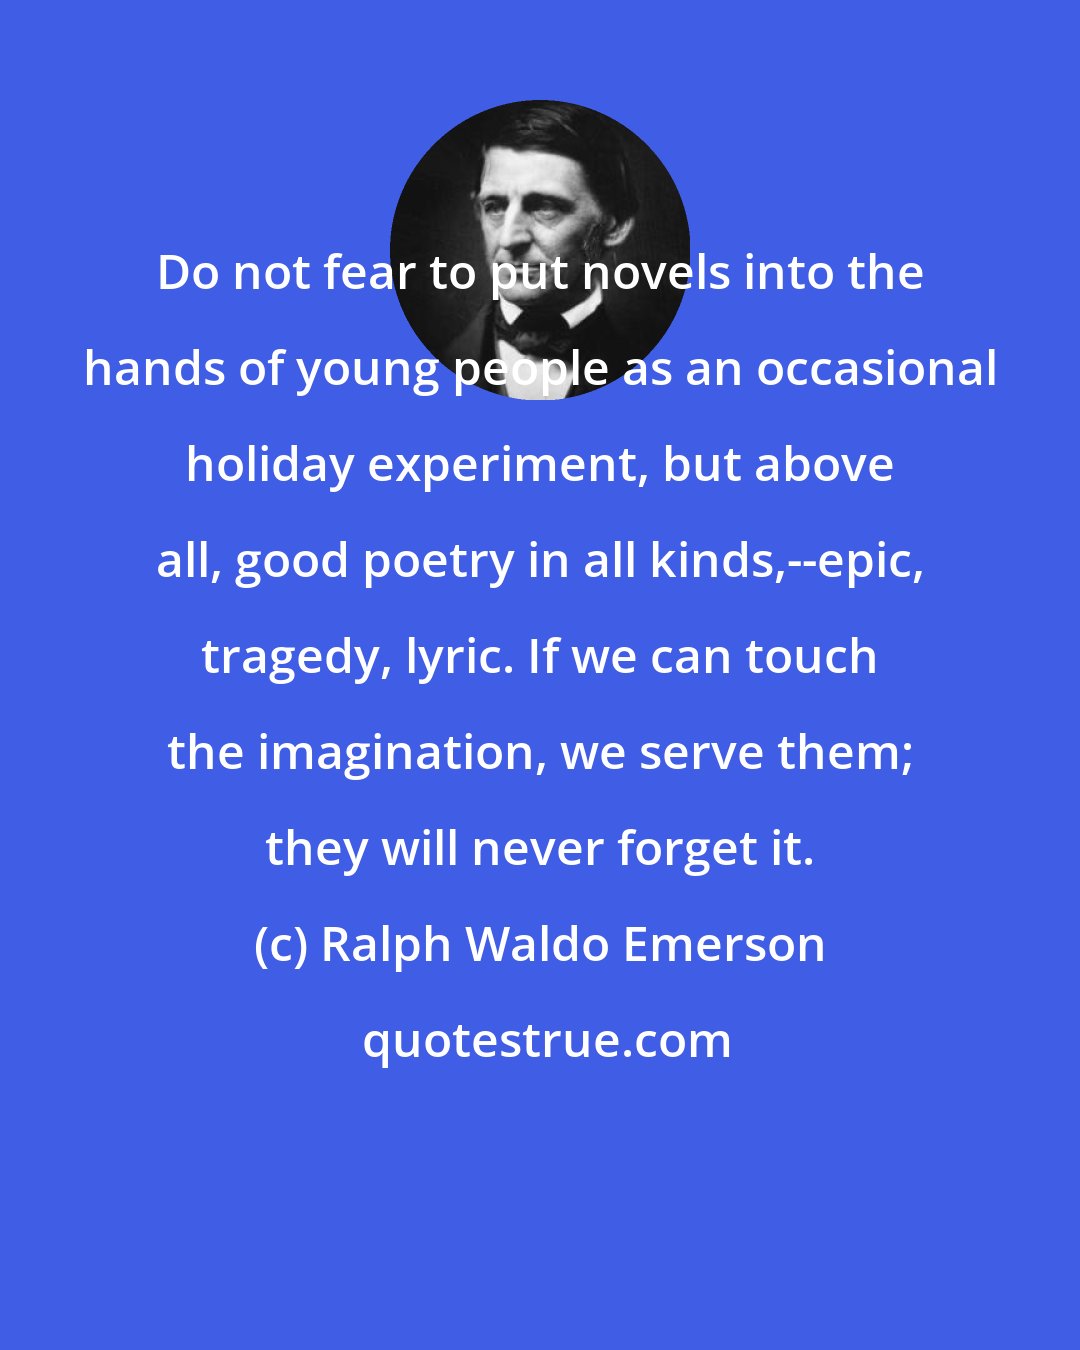 Ralph Waldo Emerson: Do not fear to put novels into the hands of young people as an occasional holiday experiment, but above all, good poetry in all kinds,--epic, tragedy, lyric. If we can touch the imagination, we serve them; they will never forget it.